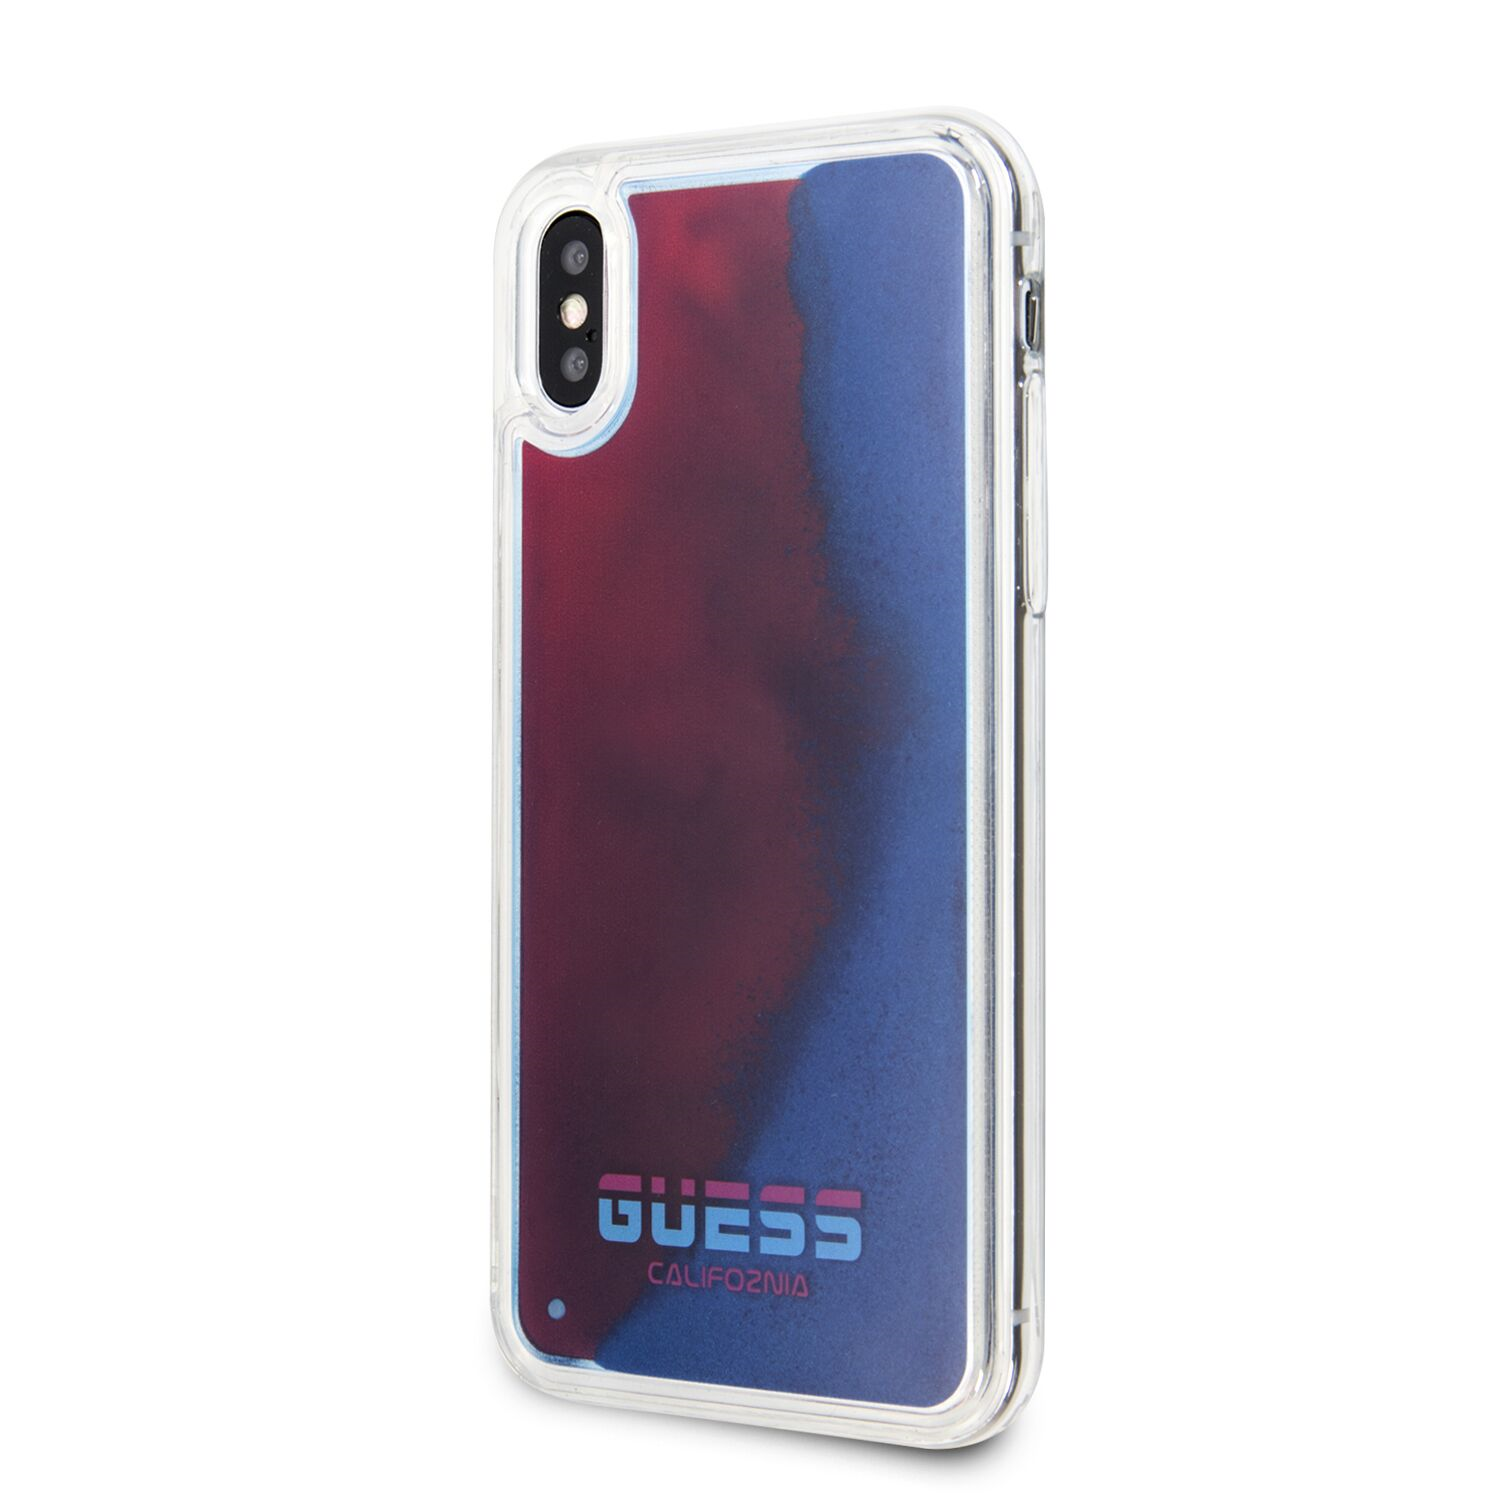 Guess Glow in The Dark GUHCPXGLCRE Zadní kryt pro Apple iPhone X/XS sand/red C/TPU Kryt pro iPhone X/XS Sand/Red (EU Blister)